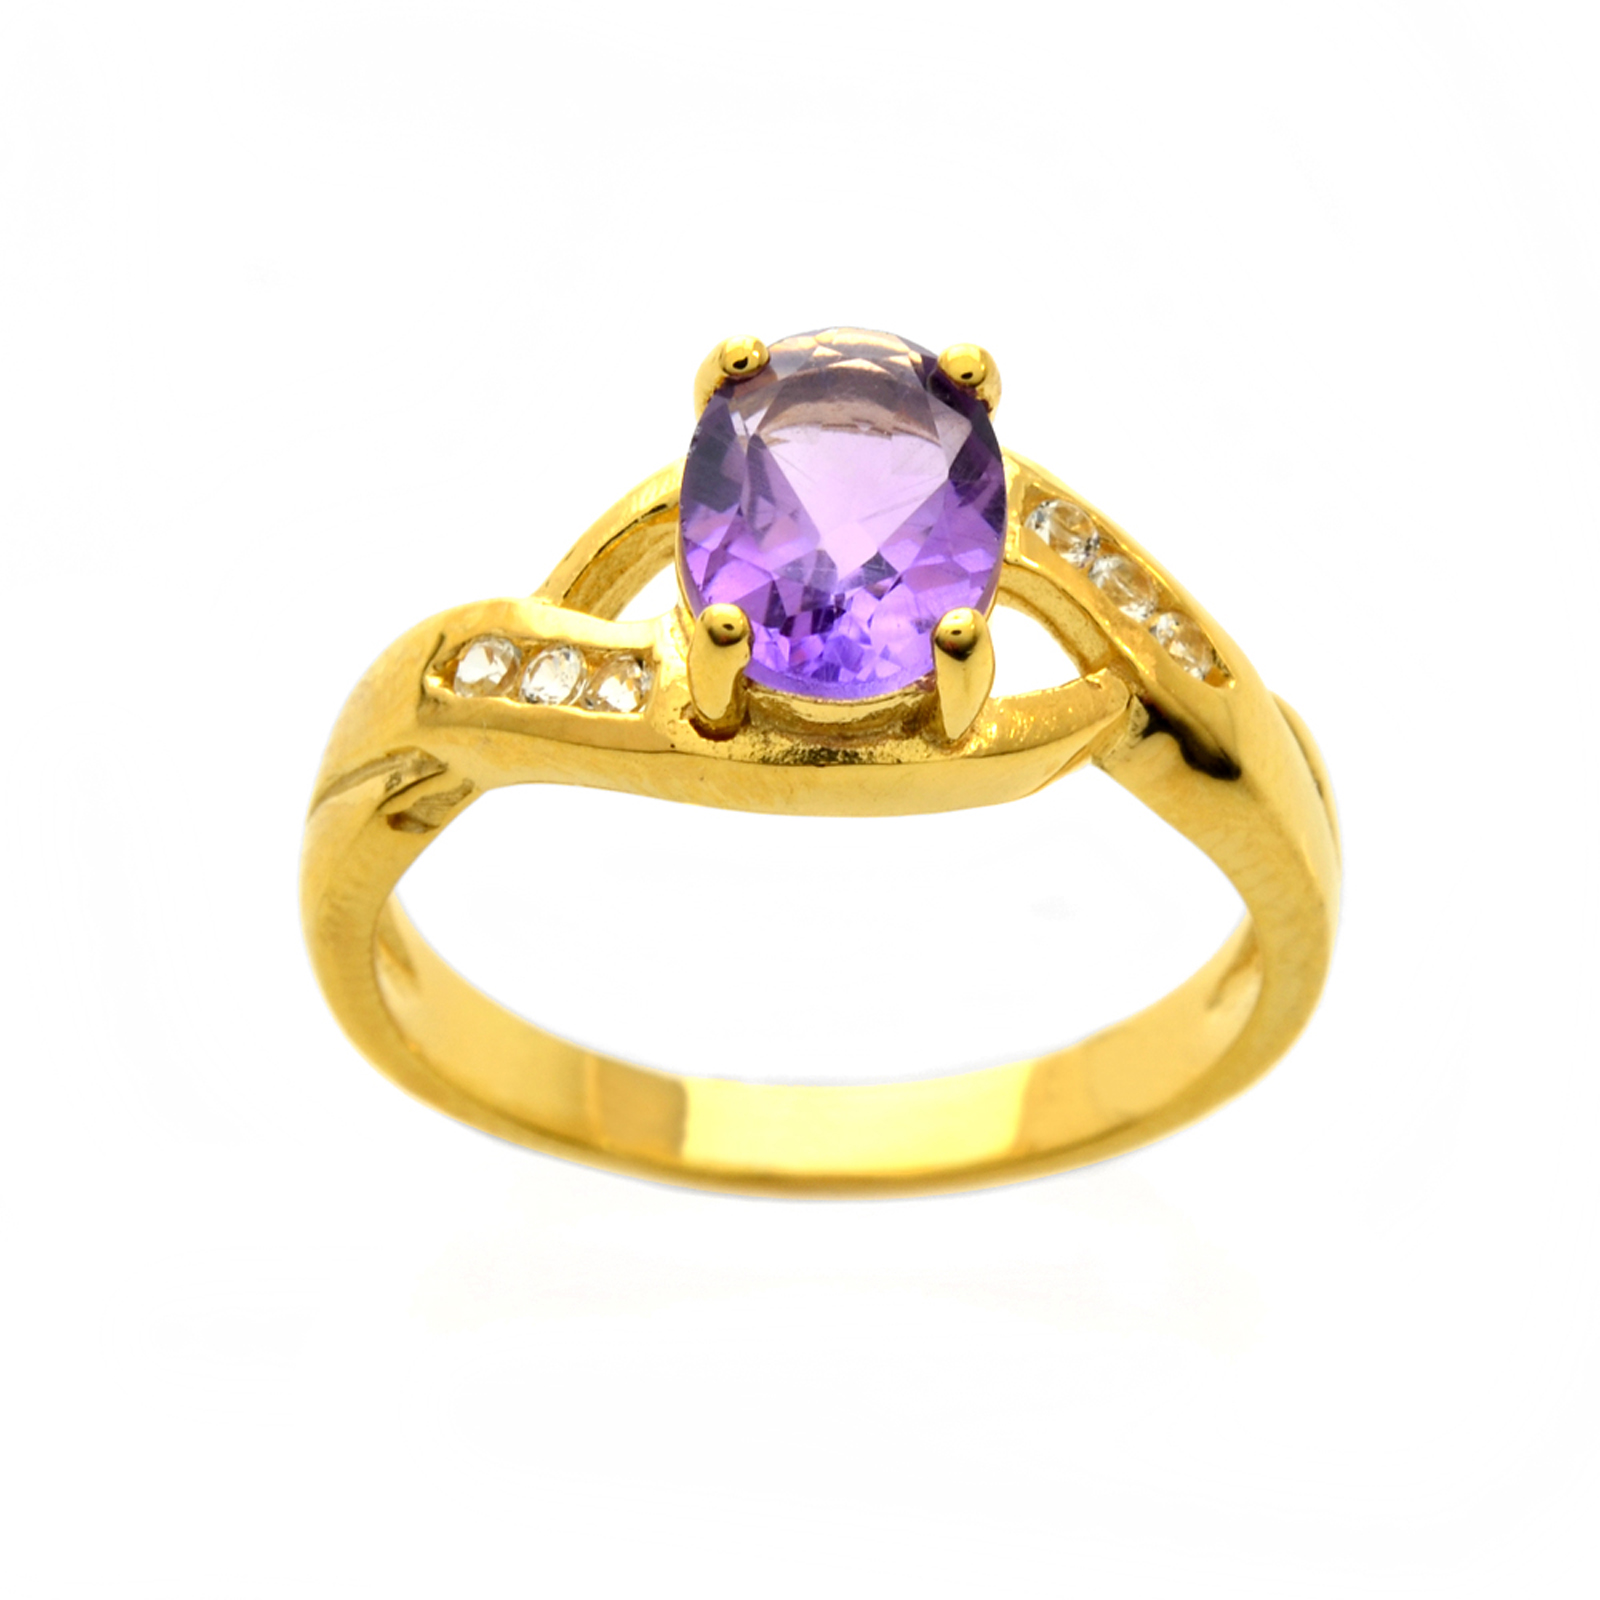 1.05 Cttw Oval Yellow Gold Amethyst and White Topaz Ring - Size 7 Only